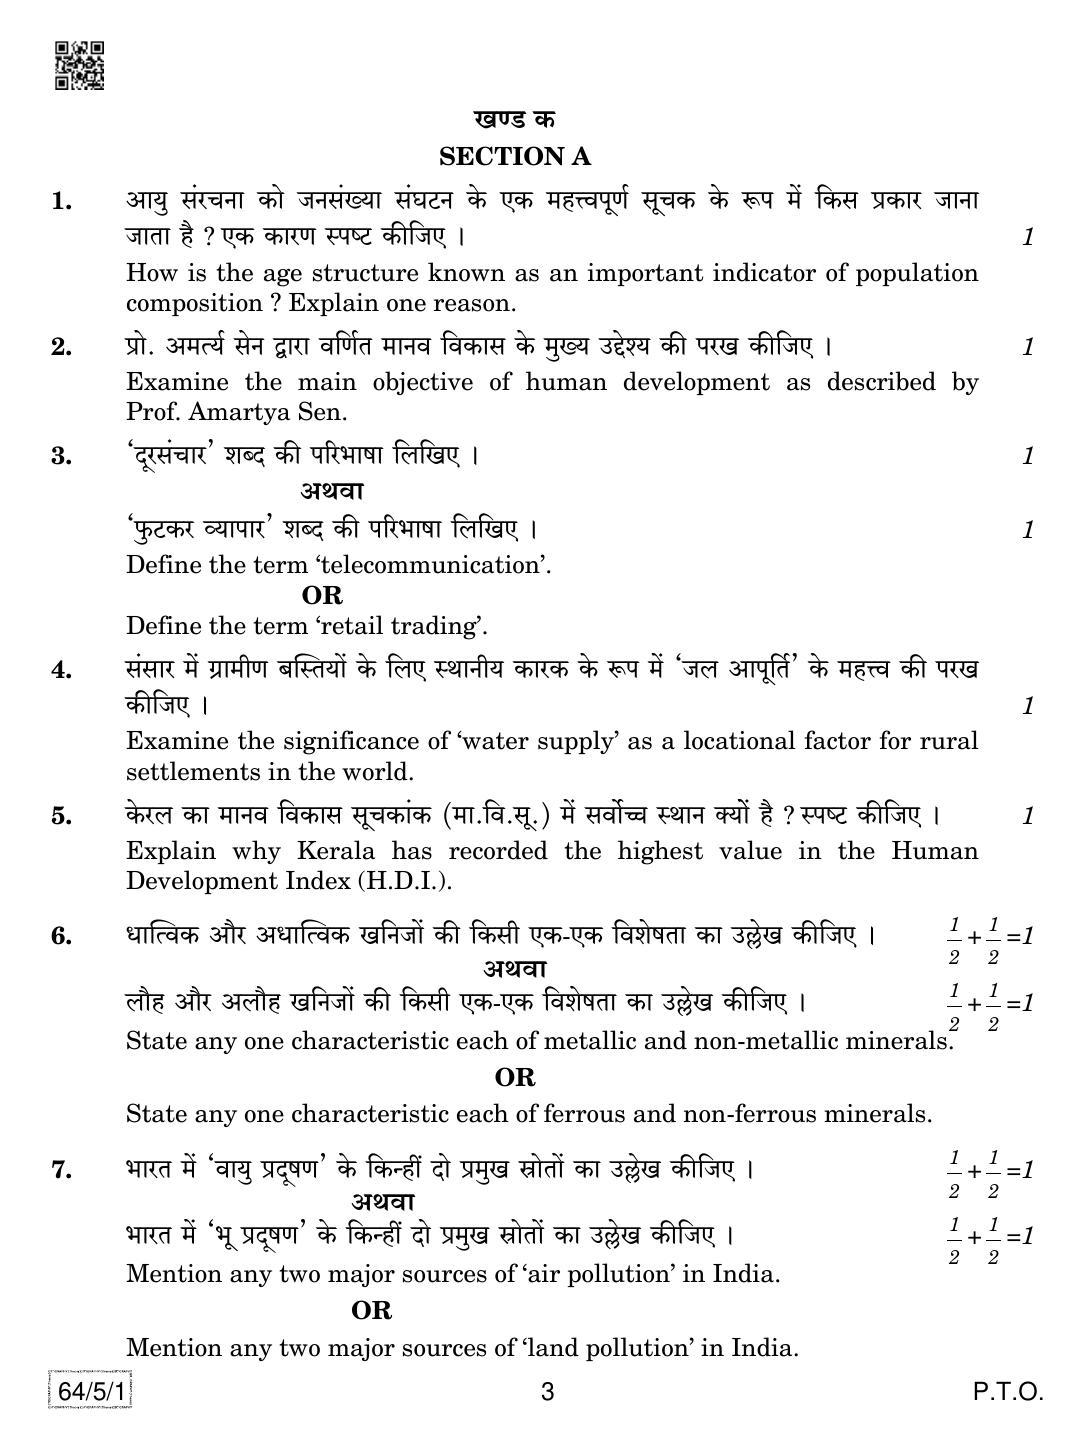 CBSE Class 12 64-5-1 Geography 2019 Question Paper - Page 3